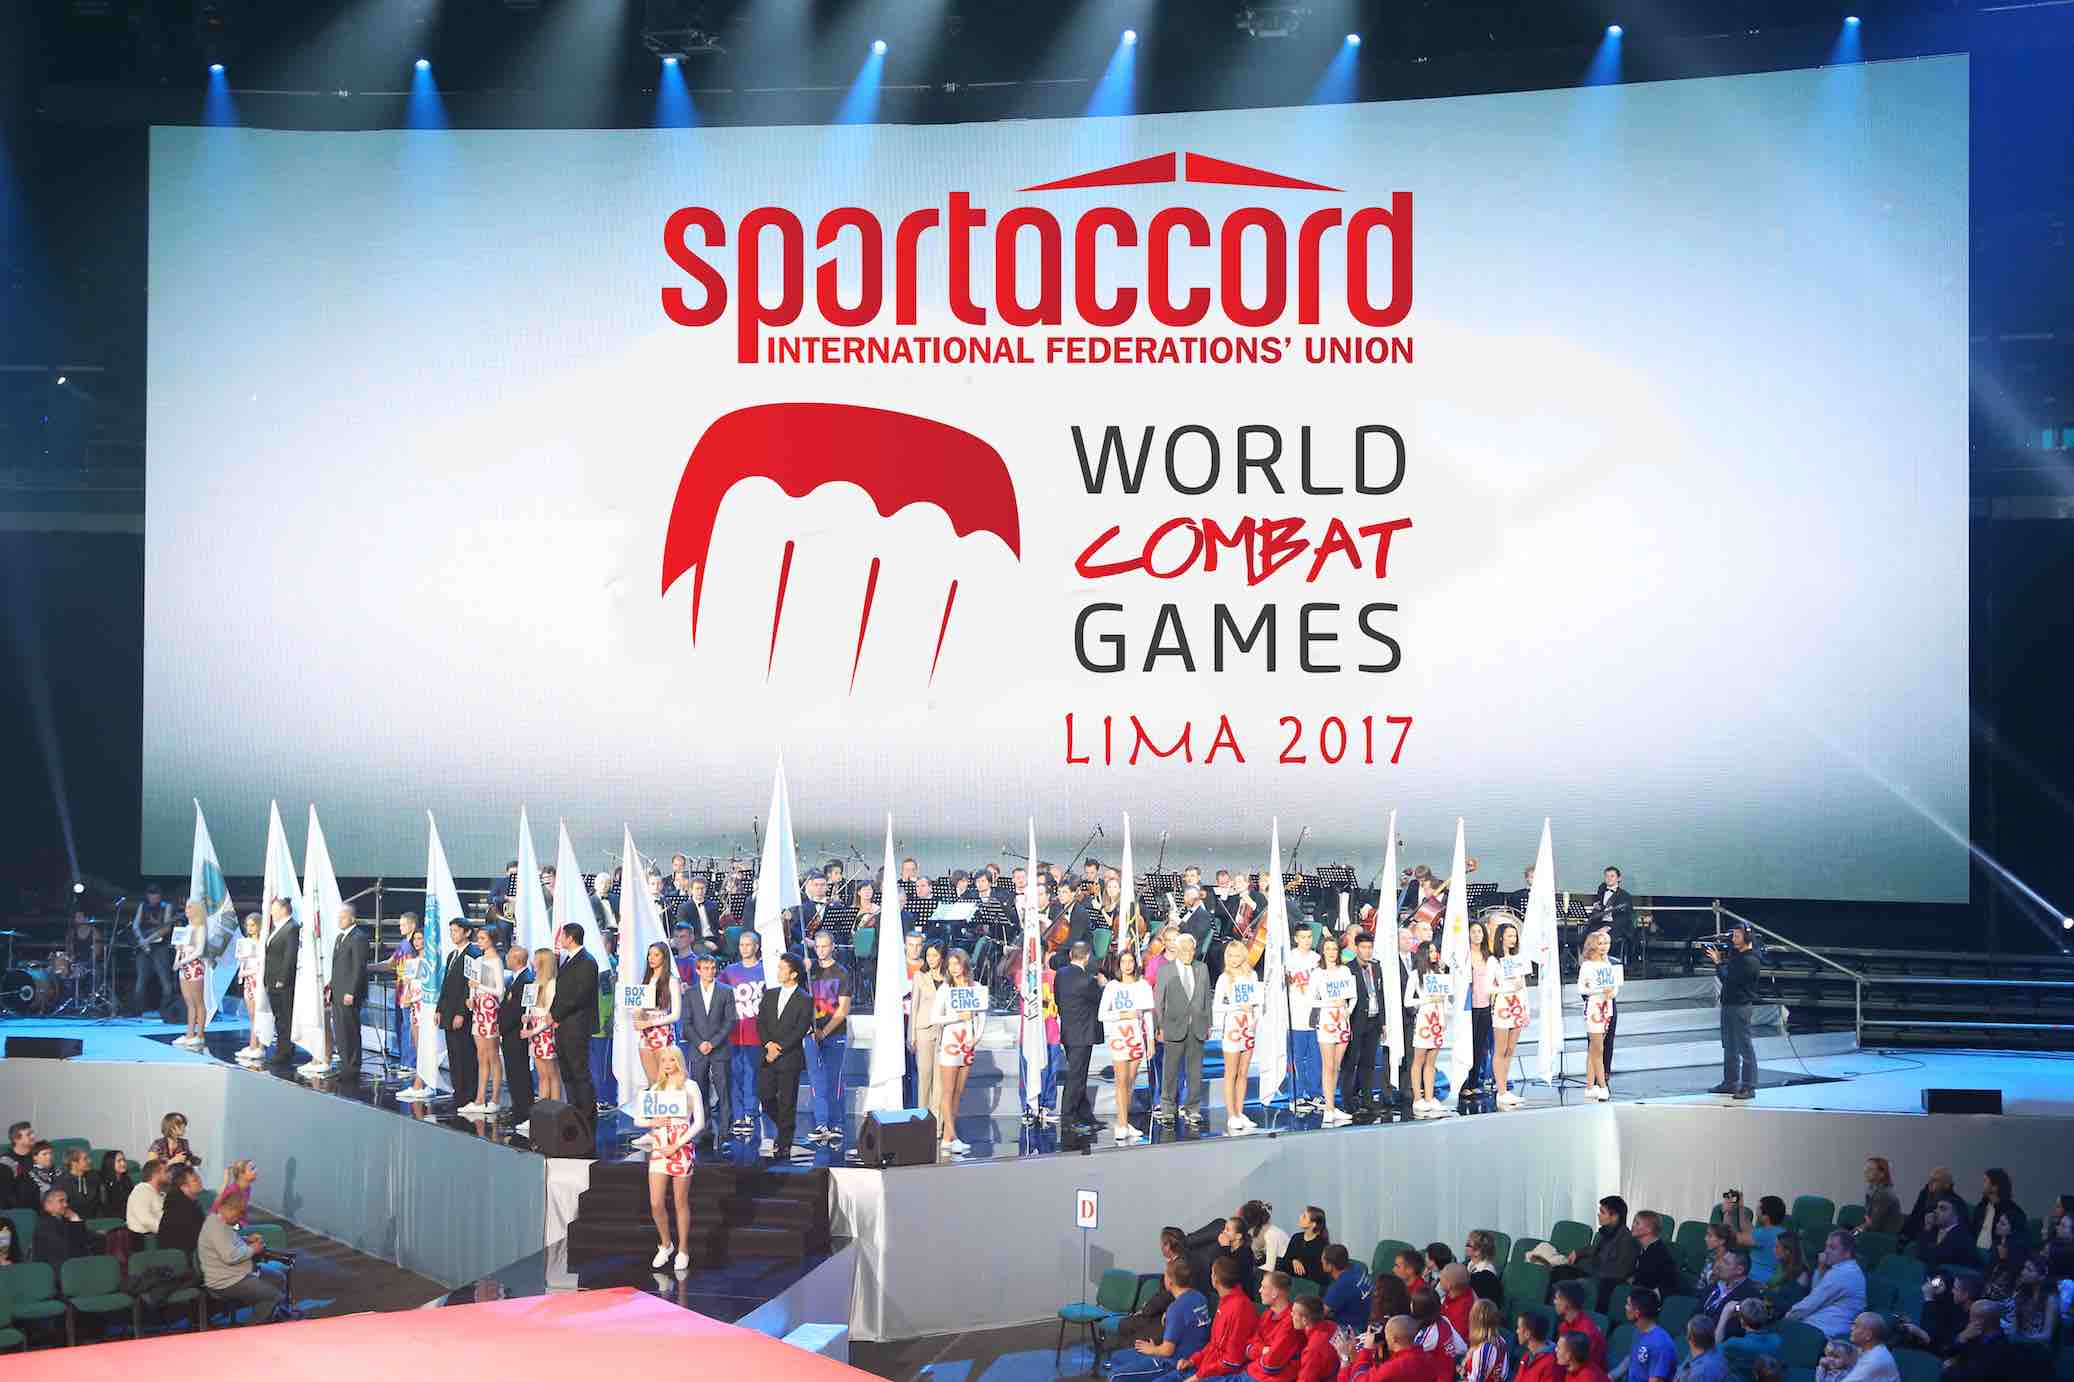 Lima in Peru has been confirmed as the host of the 2017 World Combat Games ©SportAccord 